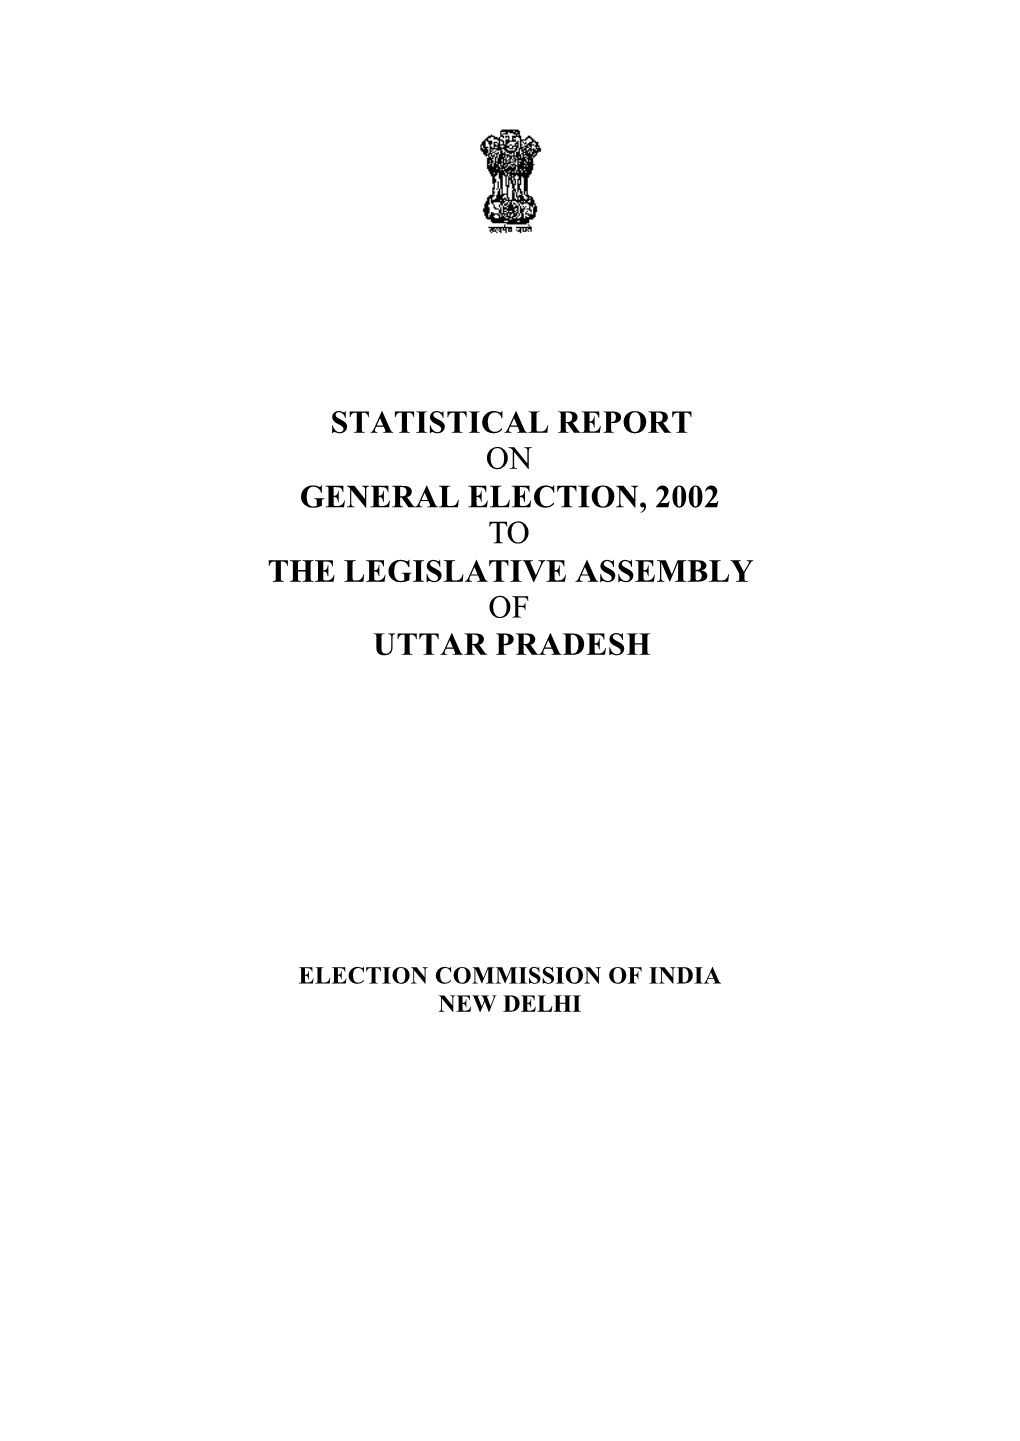 Statistical Report on General Election, 2002 to the Legislative Assembly of Uttar Pradesh